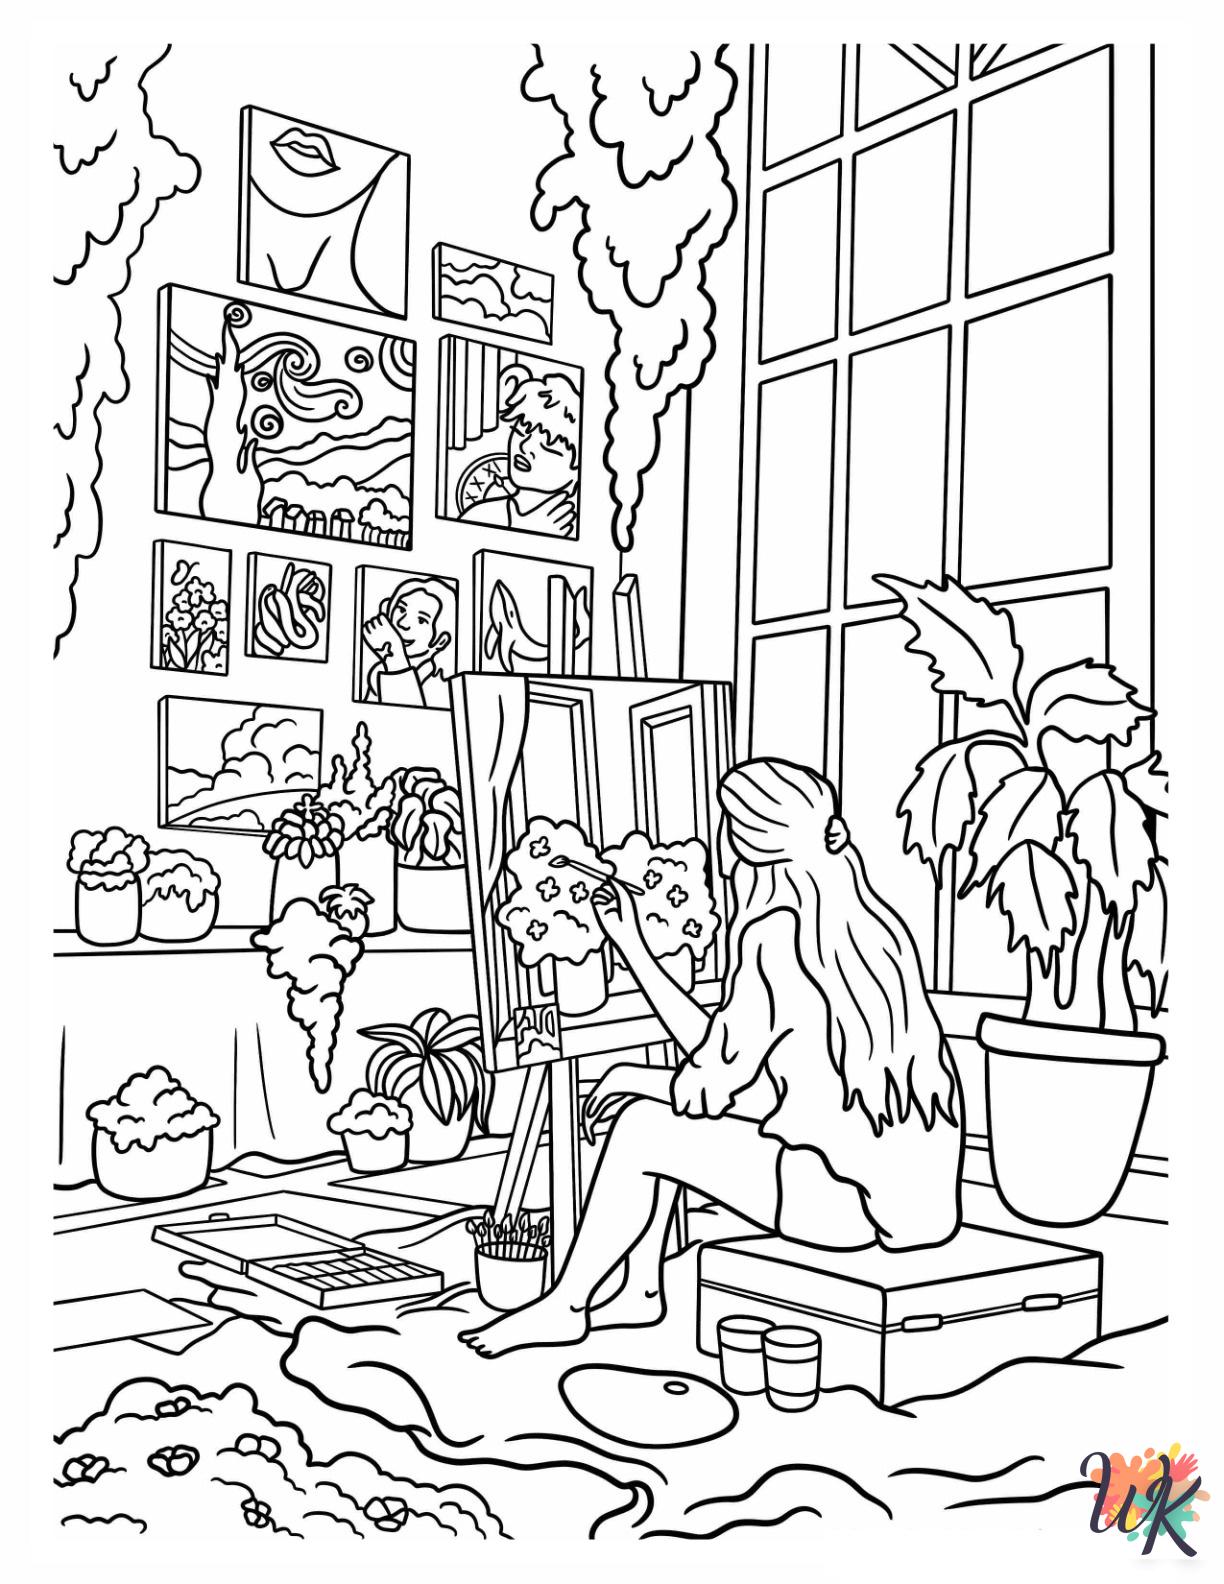 Aesthetic adult coloring pages 1